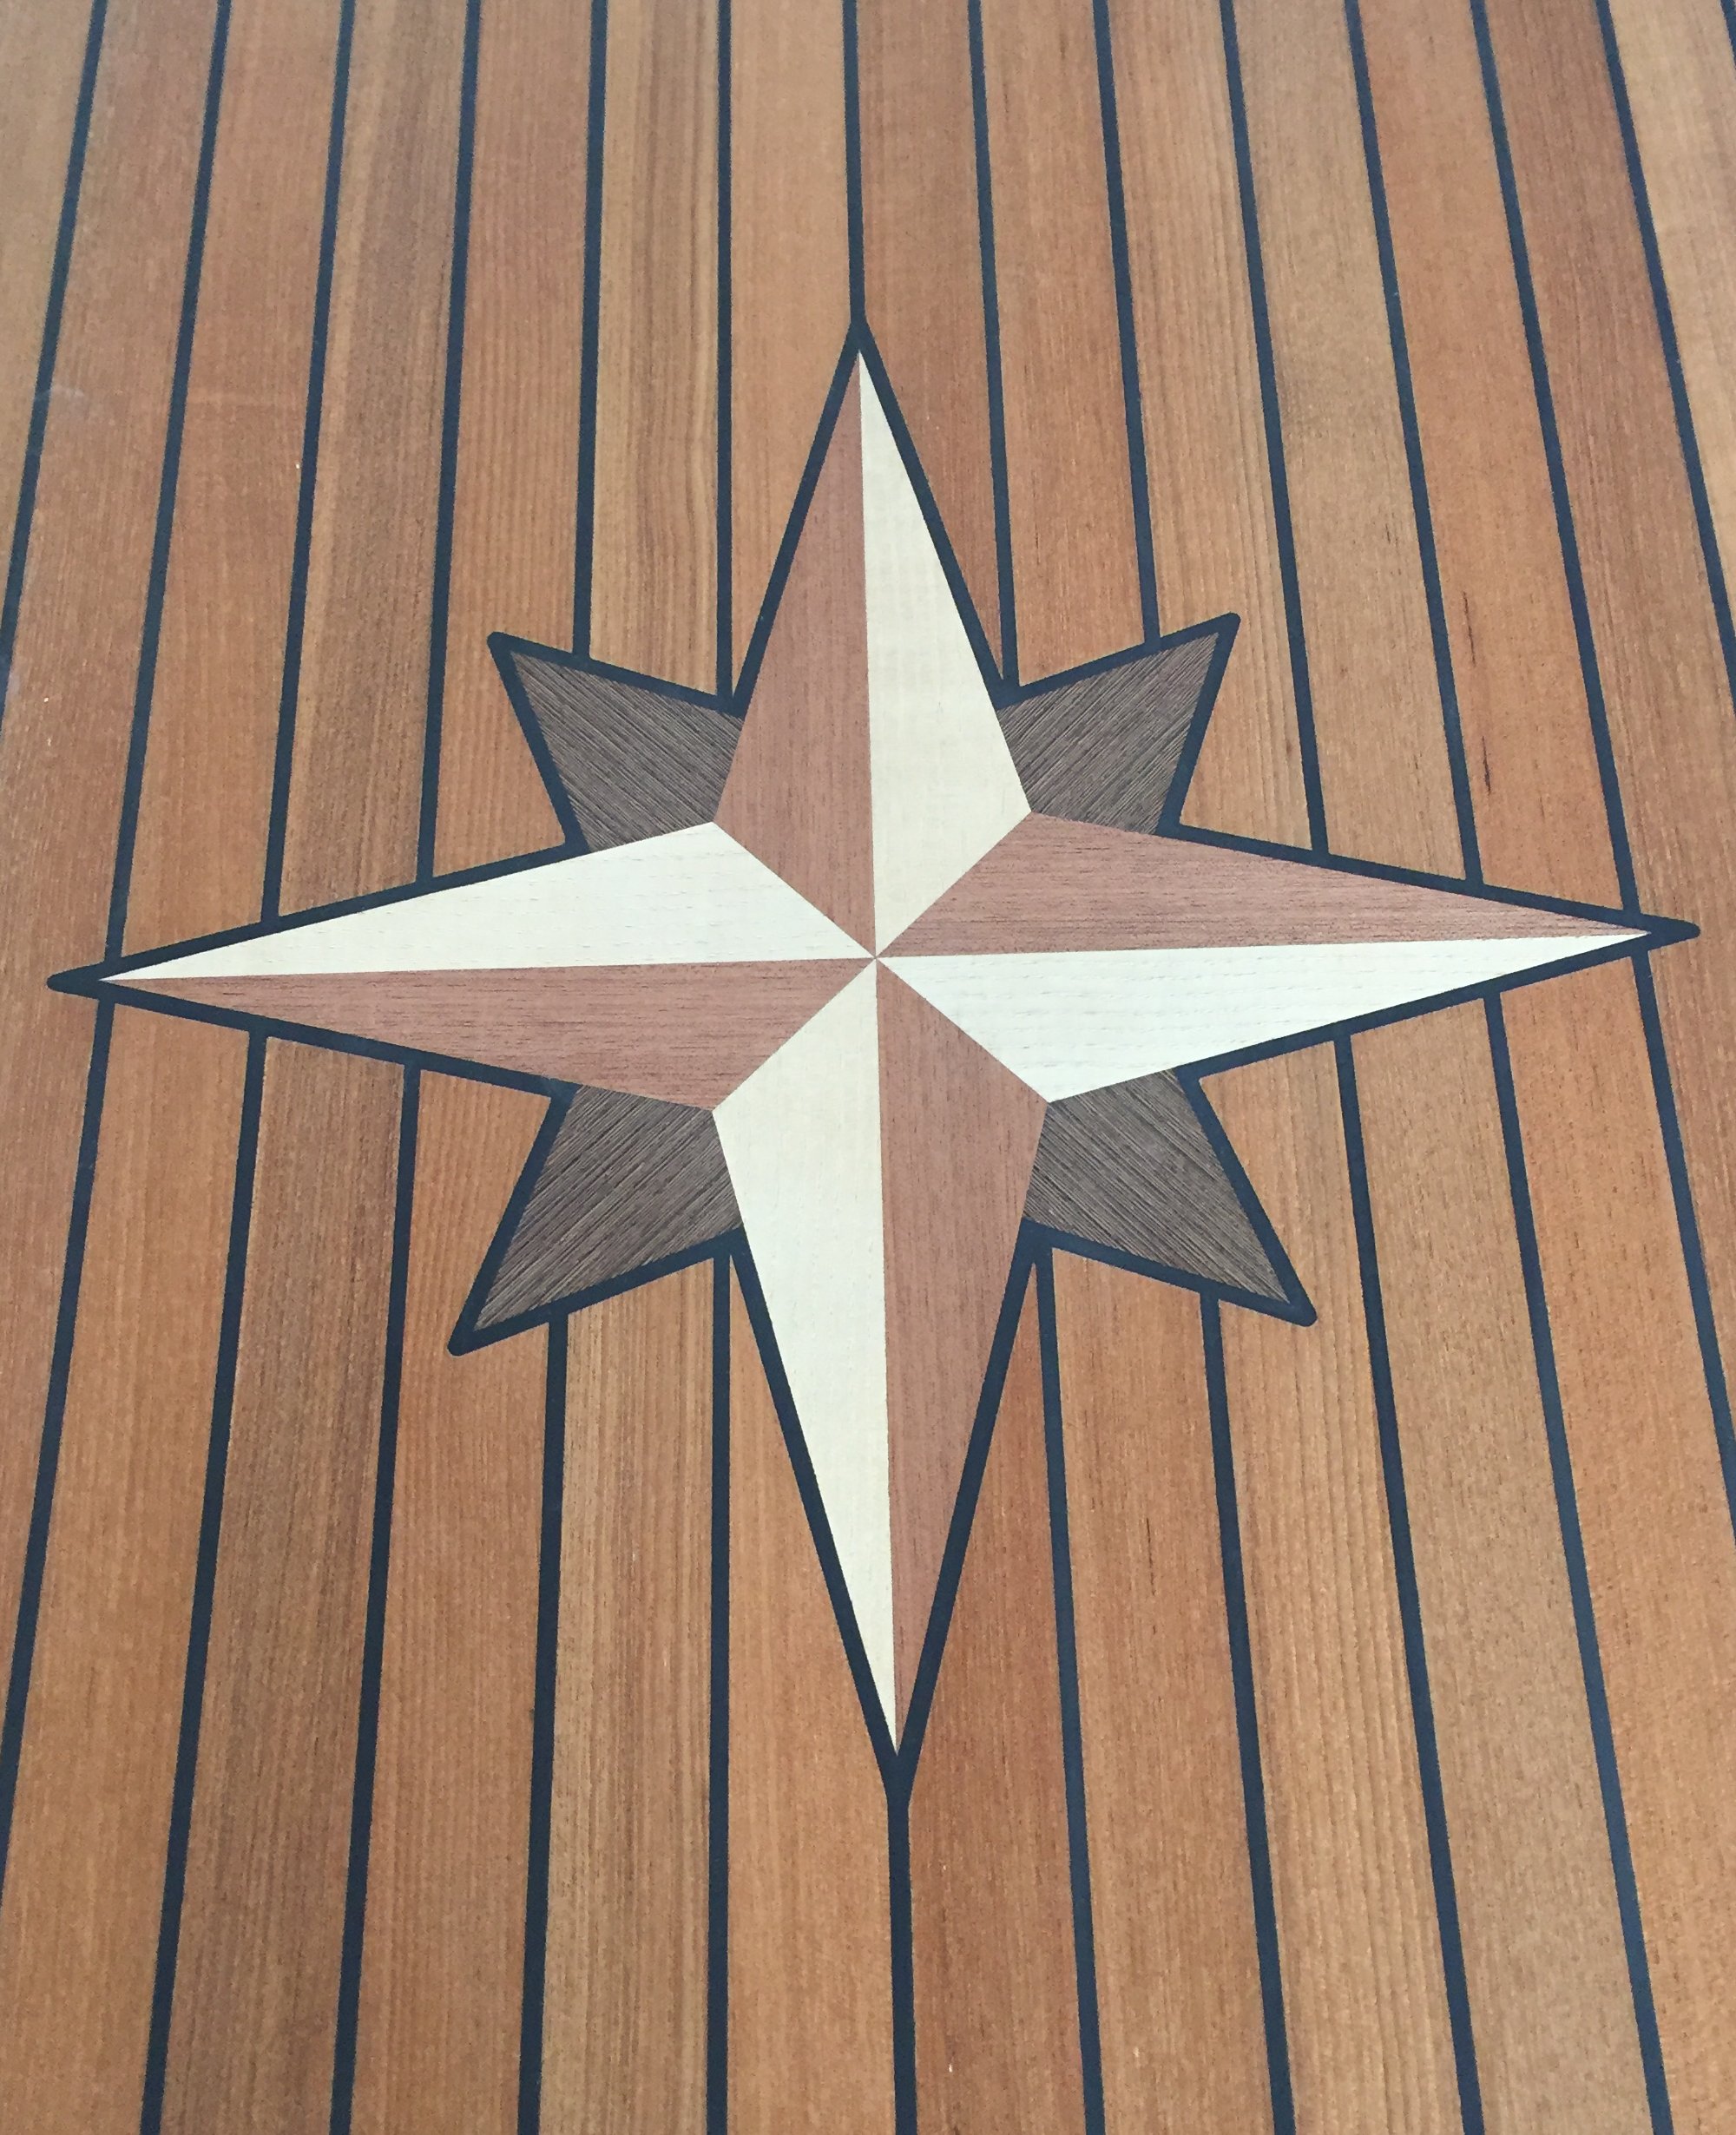 Detail view: Solid wood inlay, compass rose